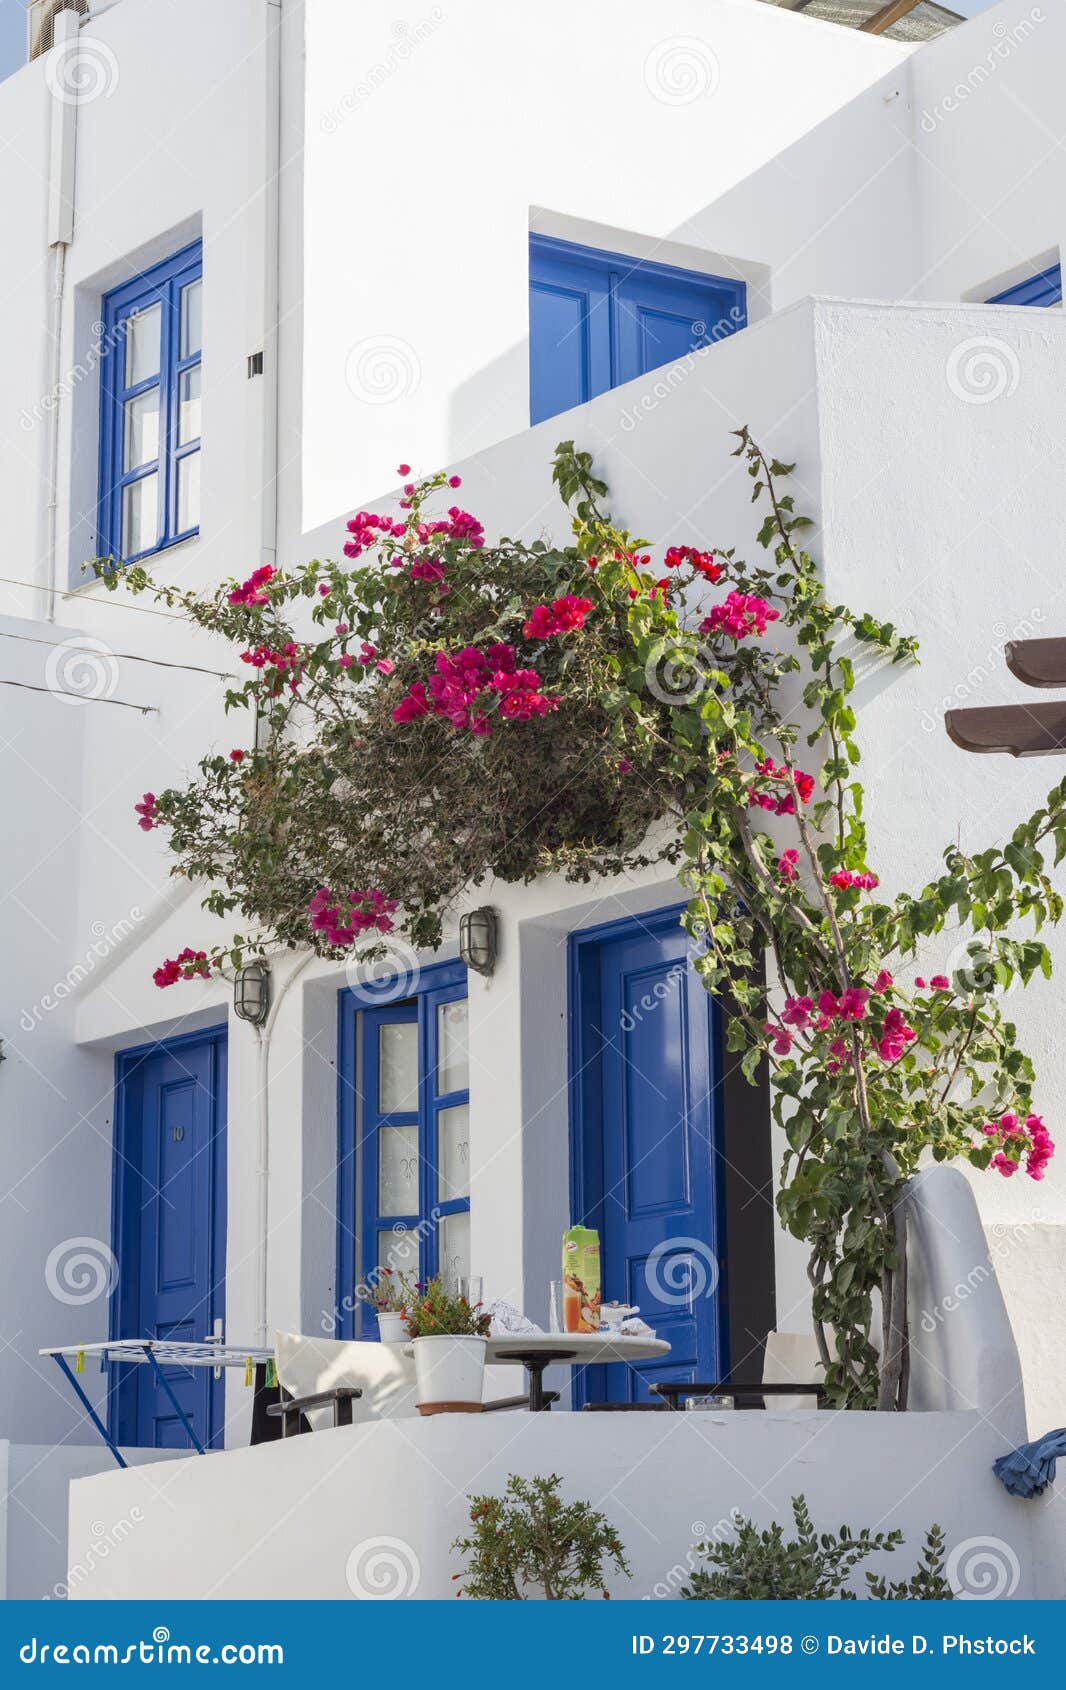 cycladic style apartments, greece